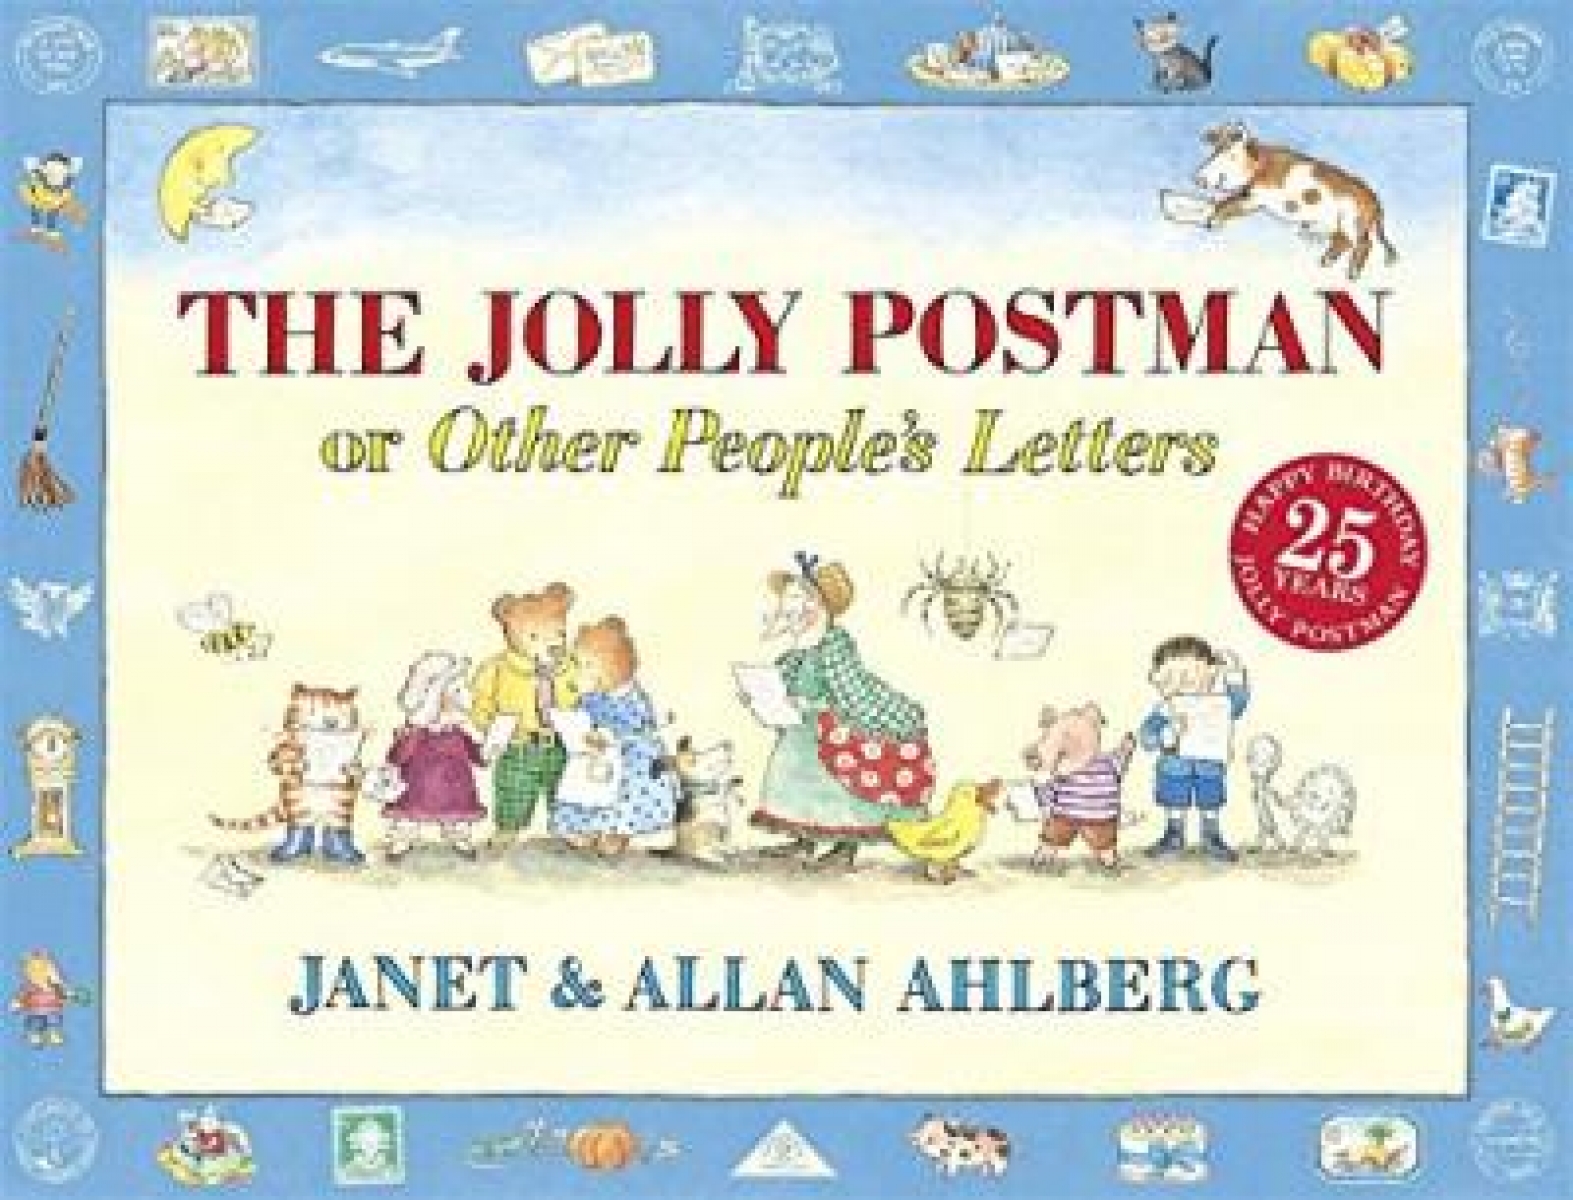 AHLBERG J.&.A. The Jolly Postman or Other Peoples Letters 